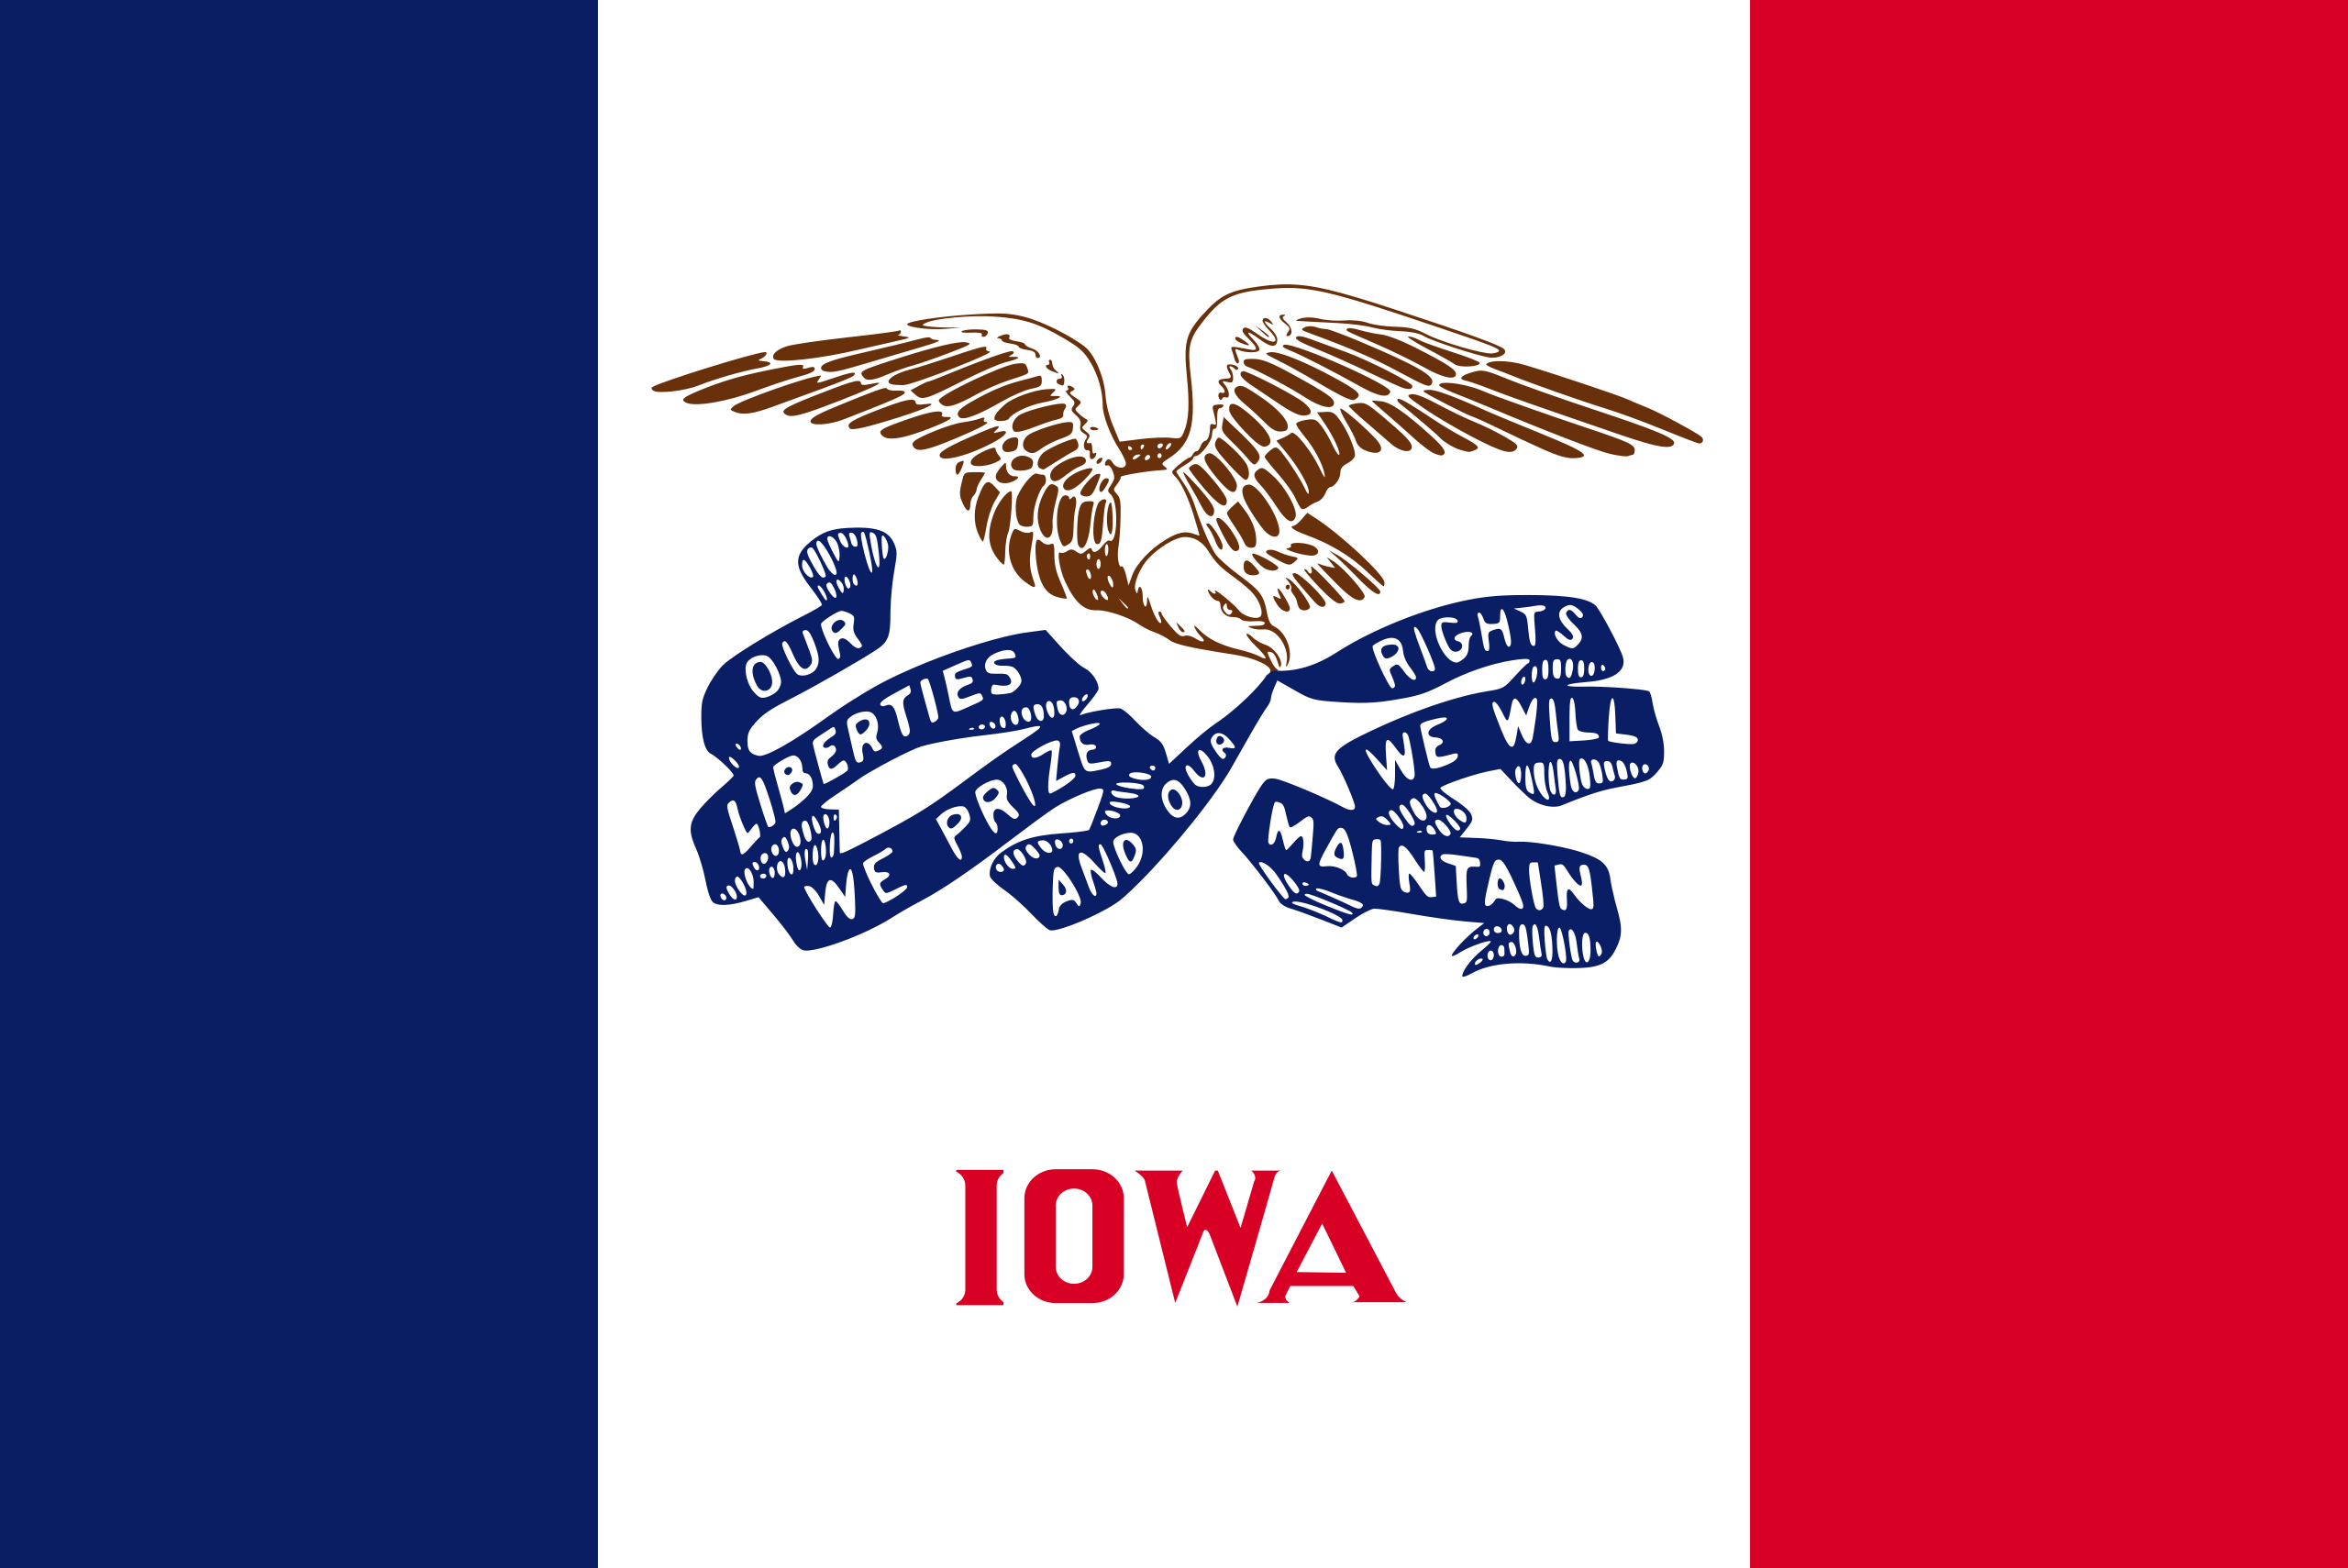 The State Flag of Iowa